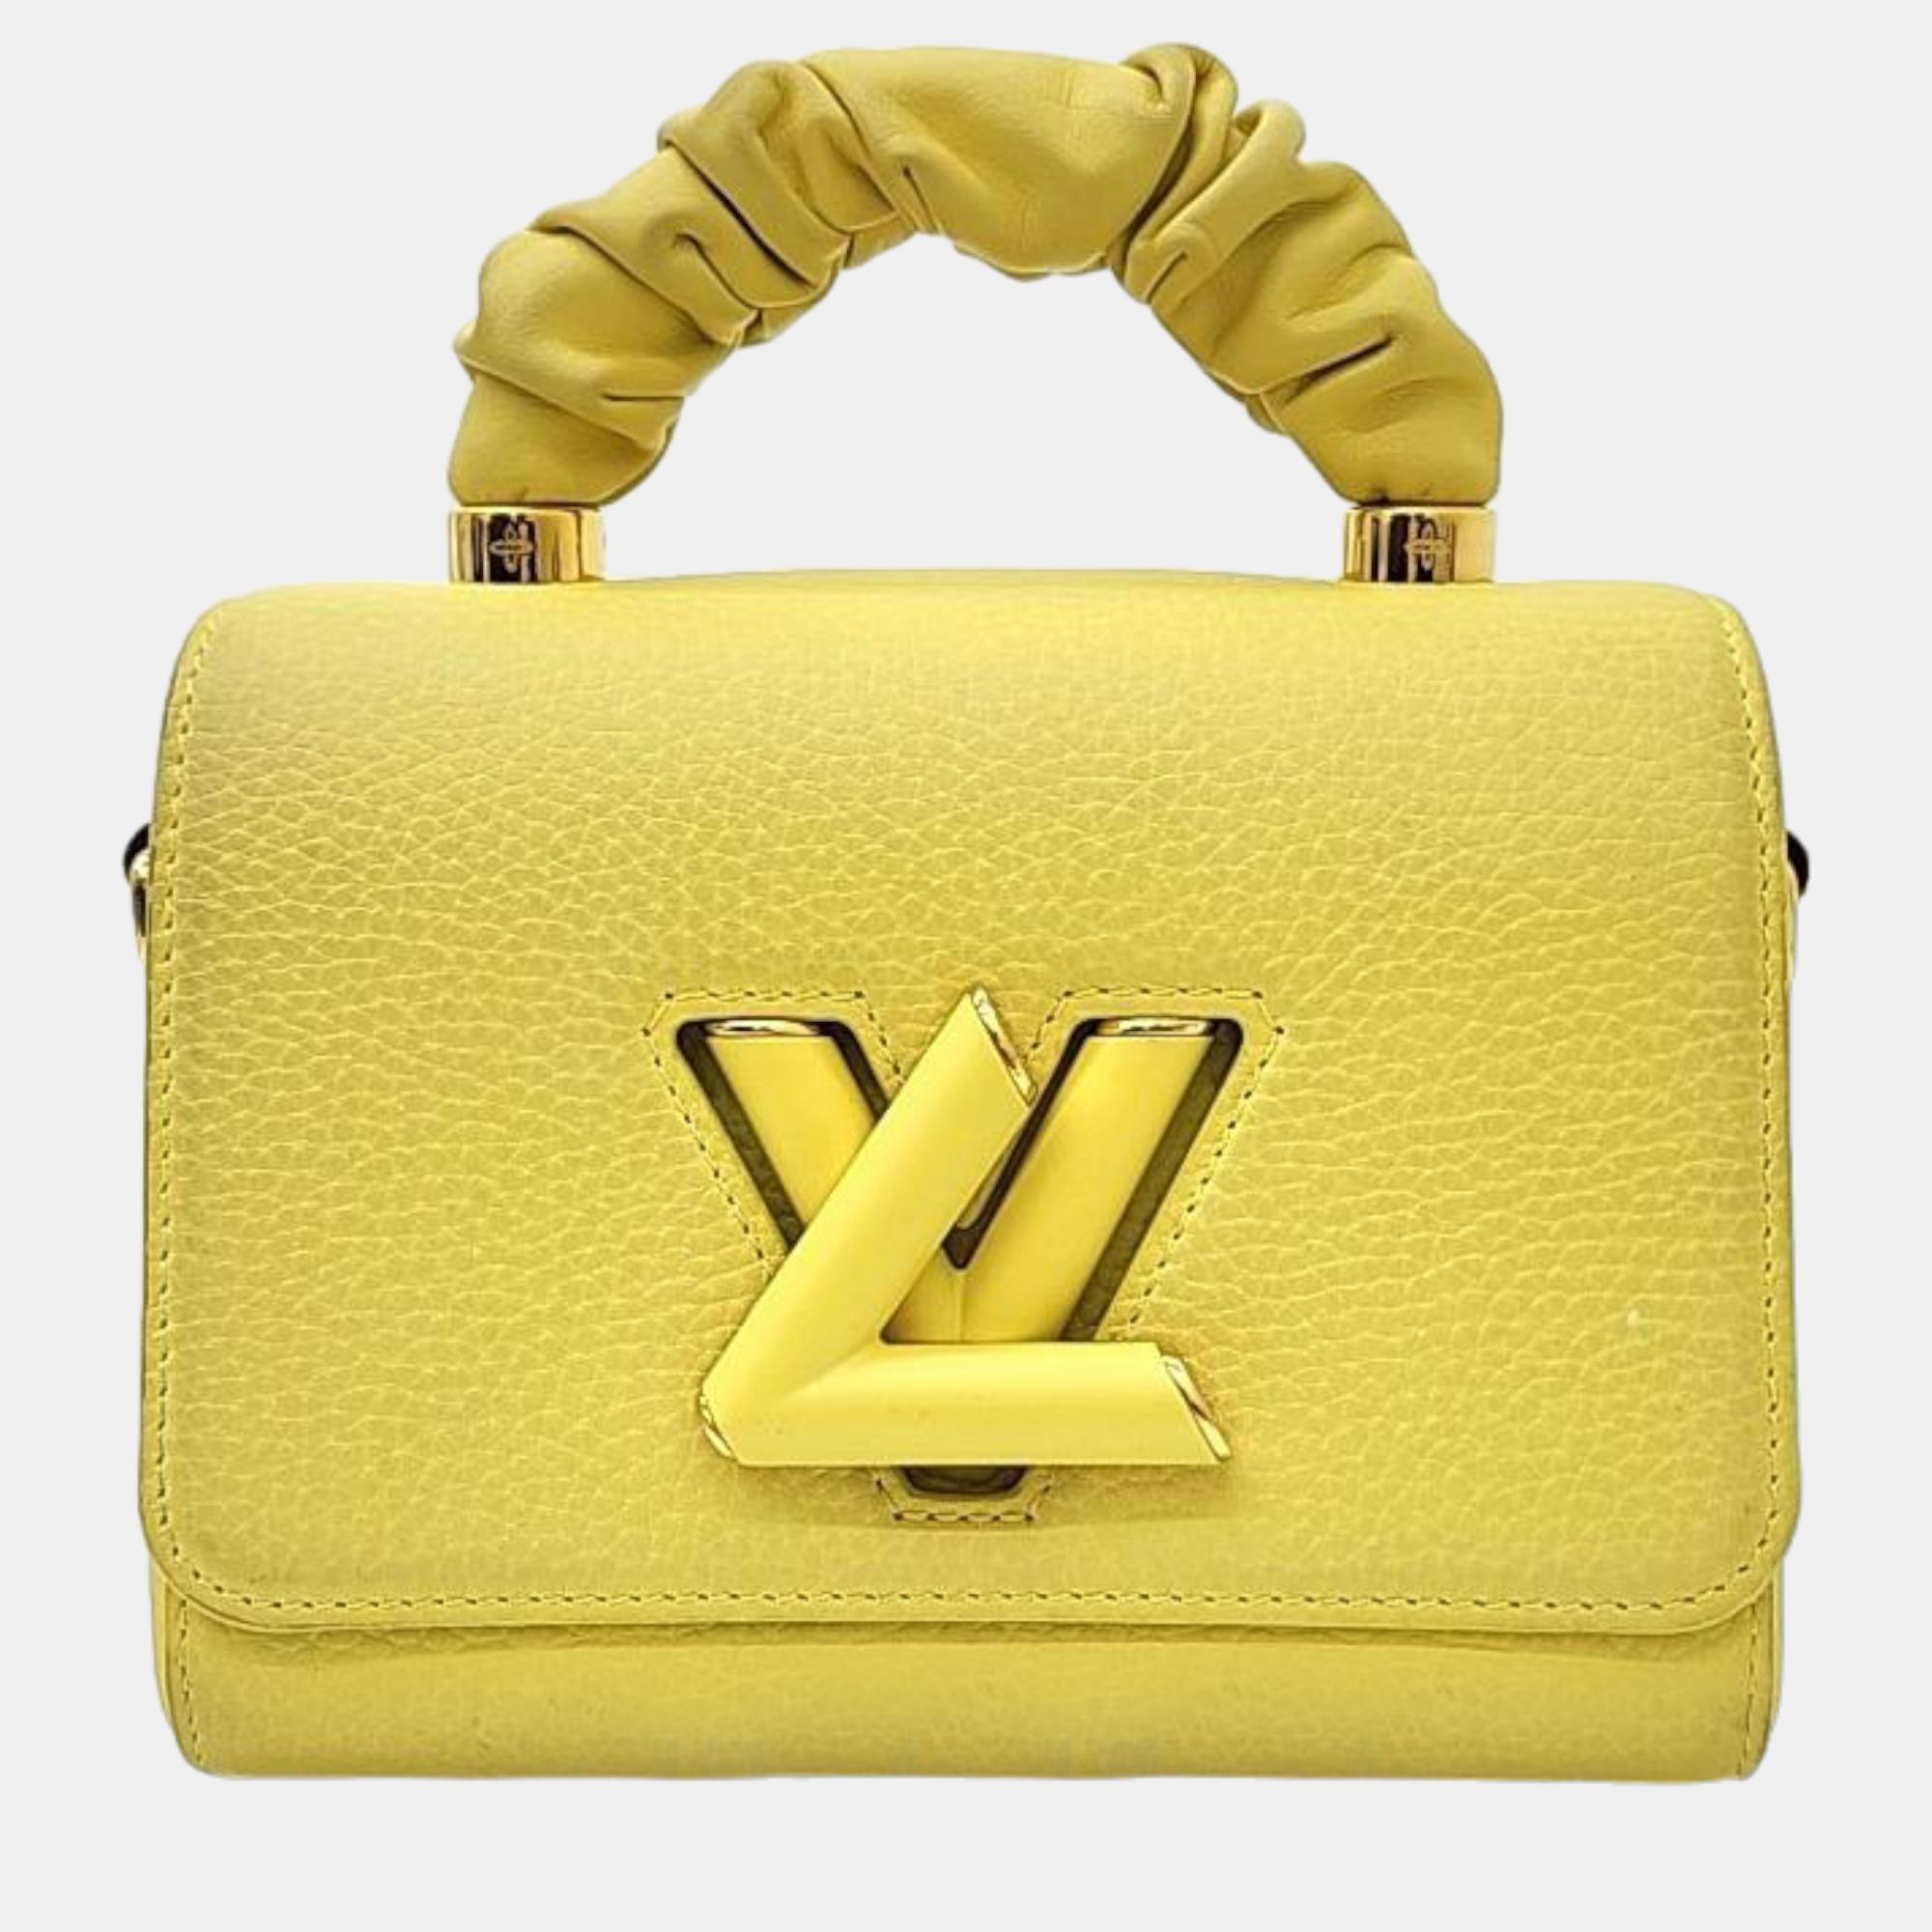 Louis vuitton yellow leather twist pm top handle bag